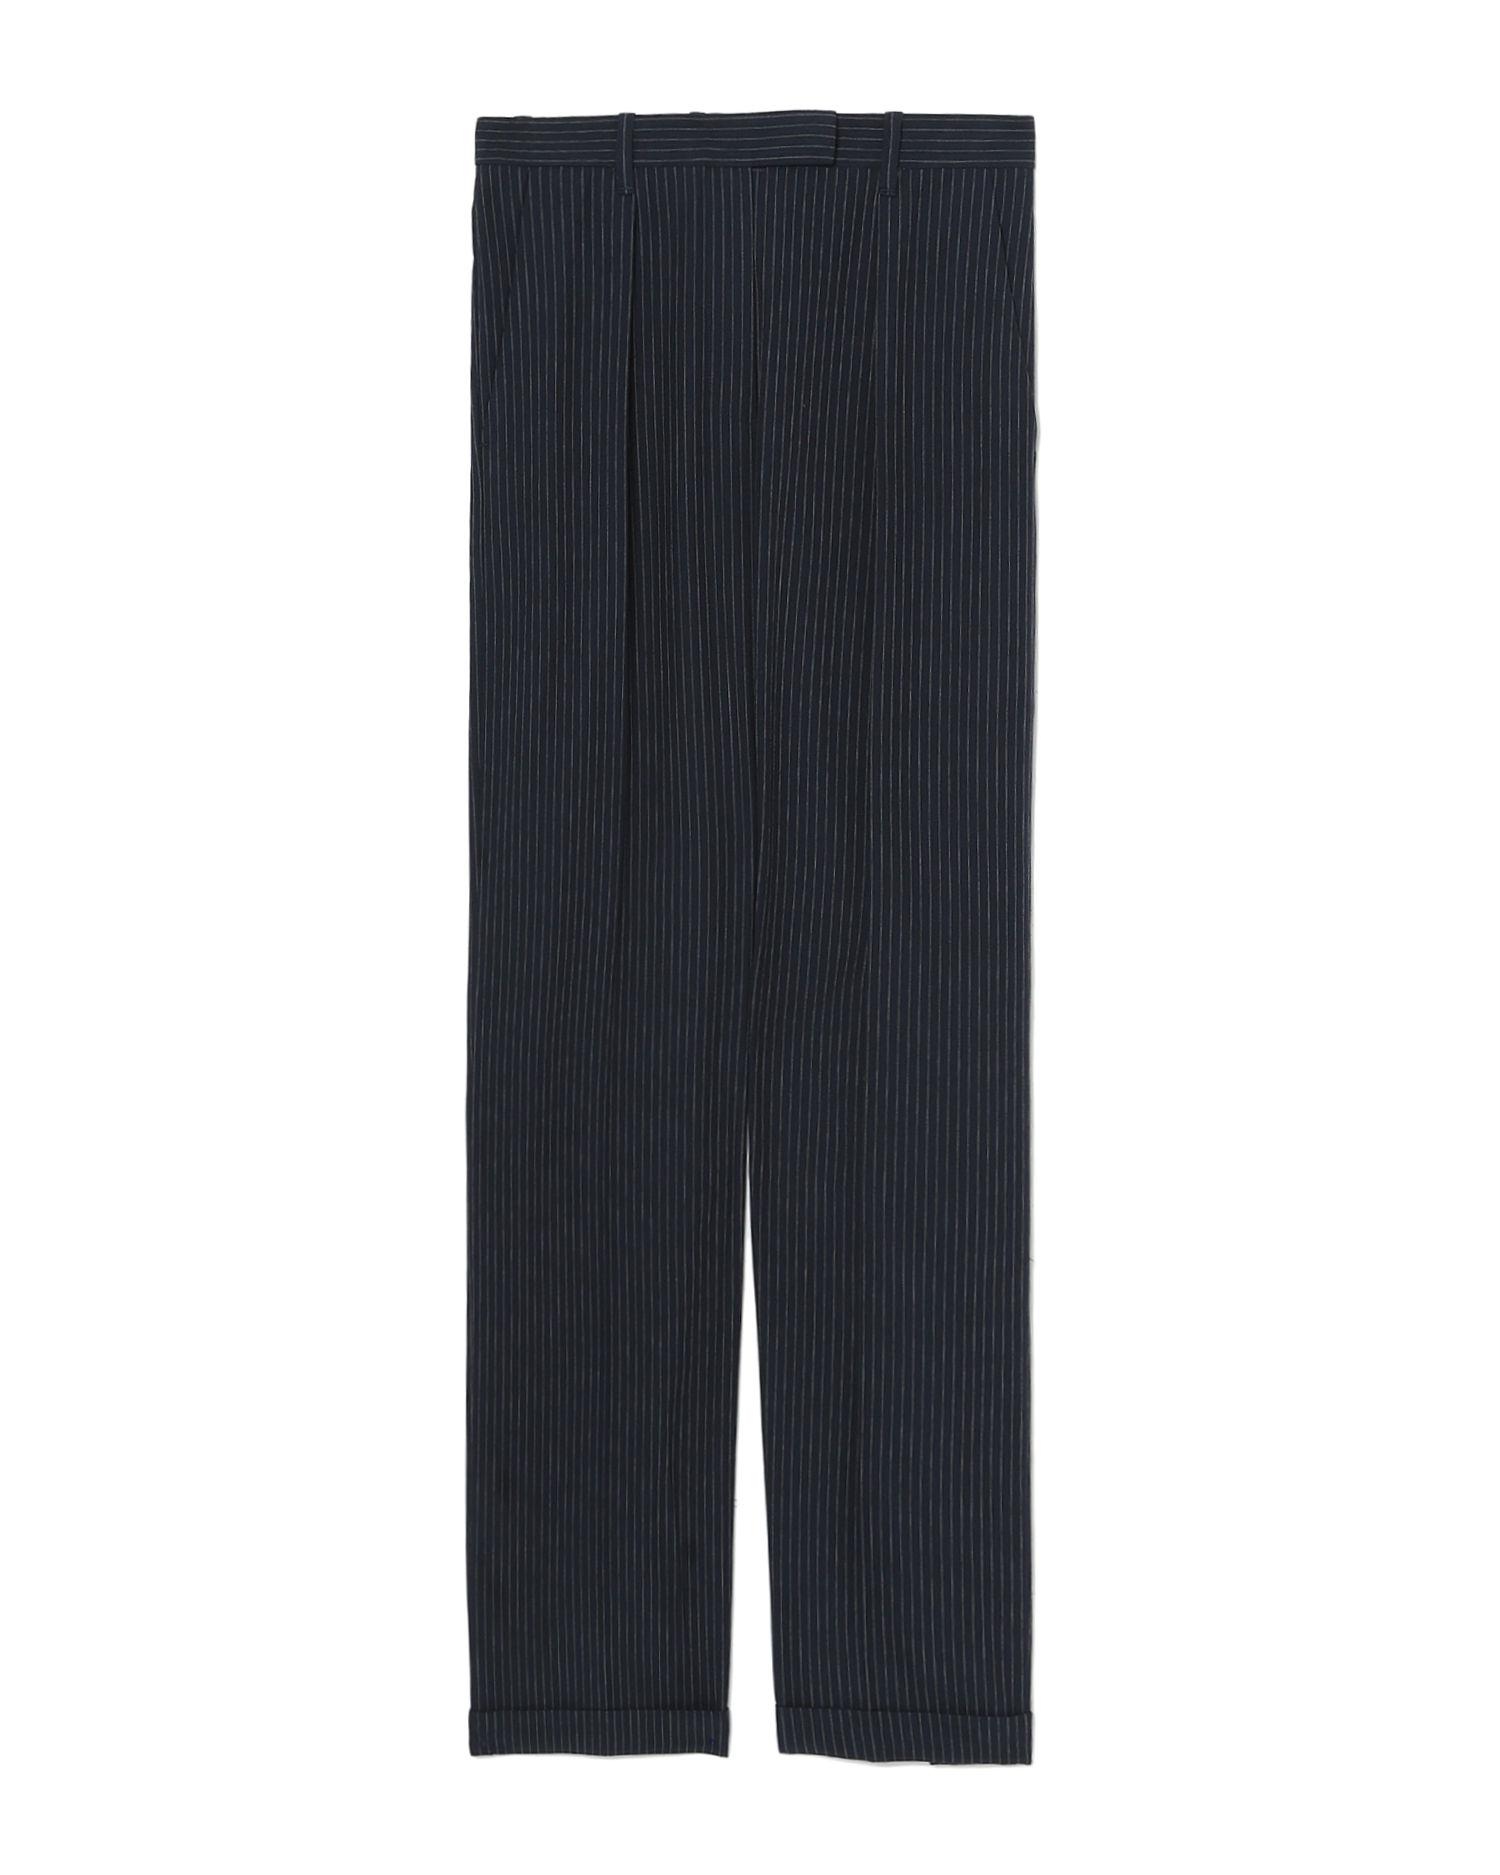 Camila pants by A.P.C.